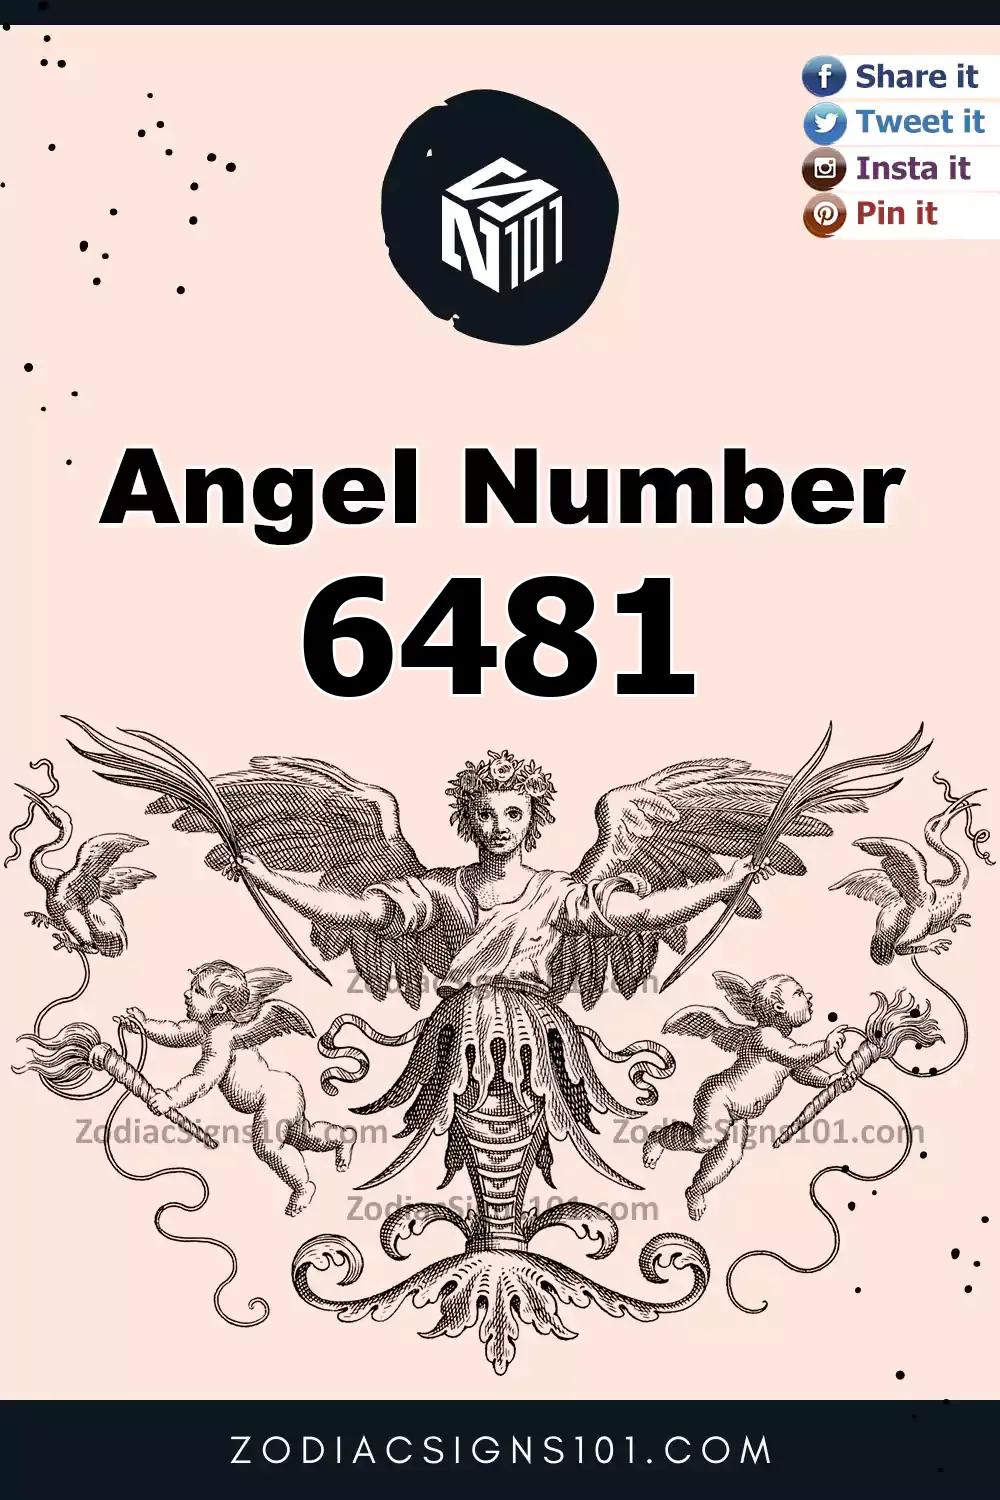 6481 Angel Number Spiritual Meaning And Significance - ZodiacSigns101